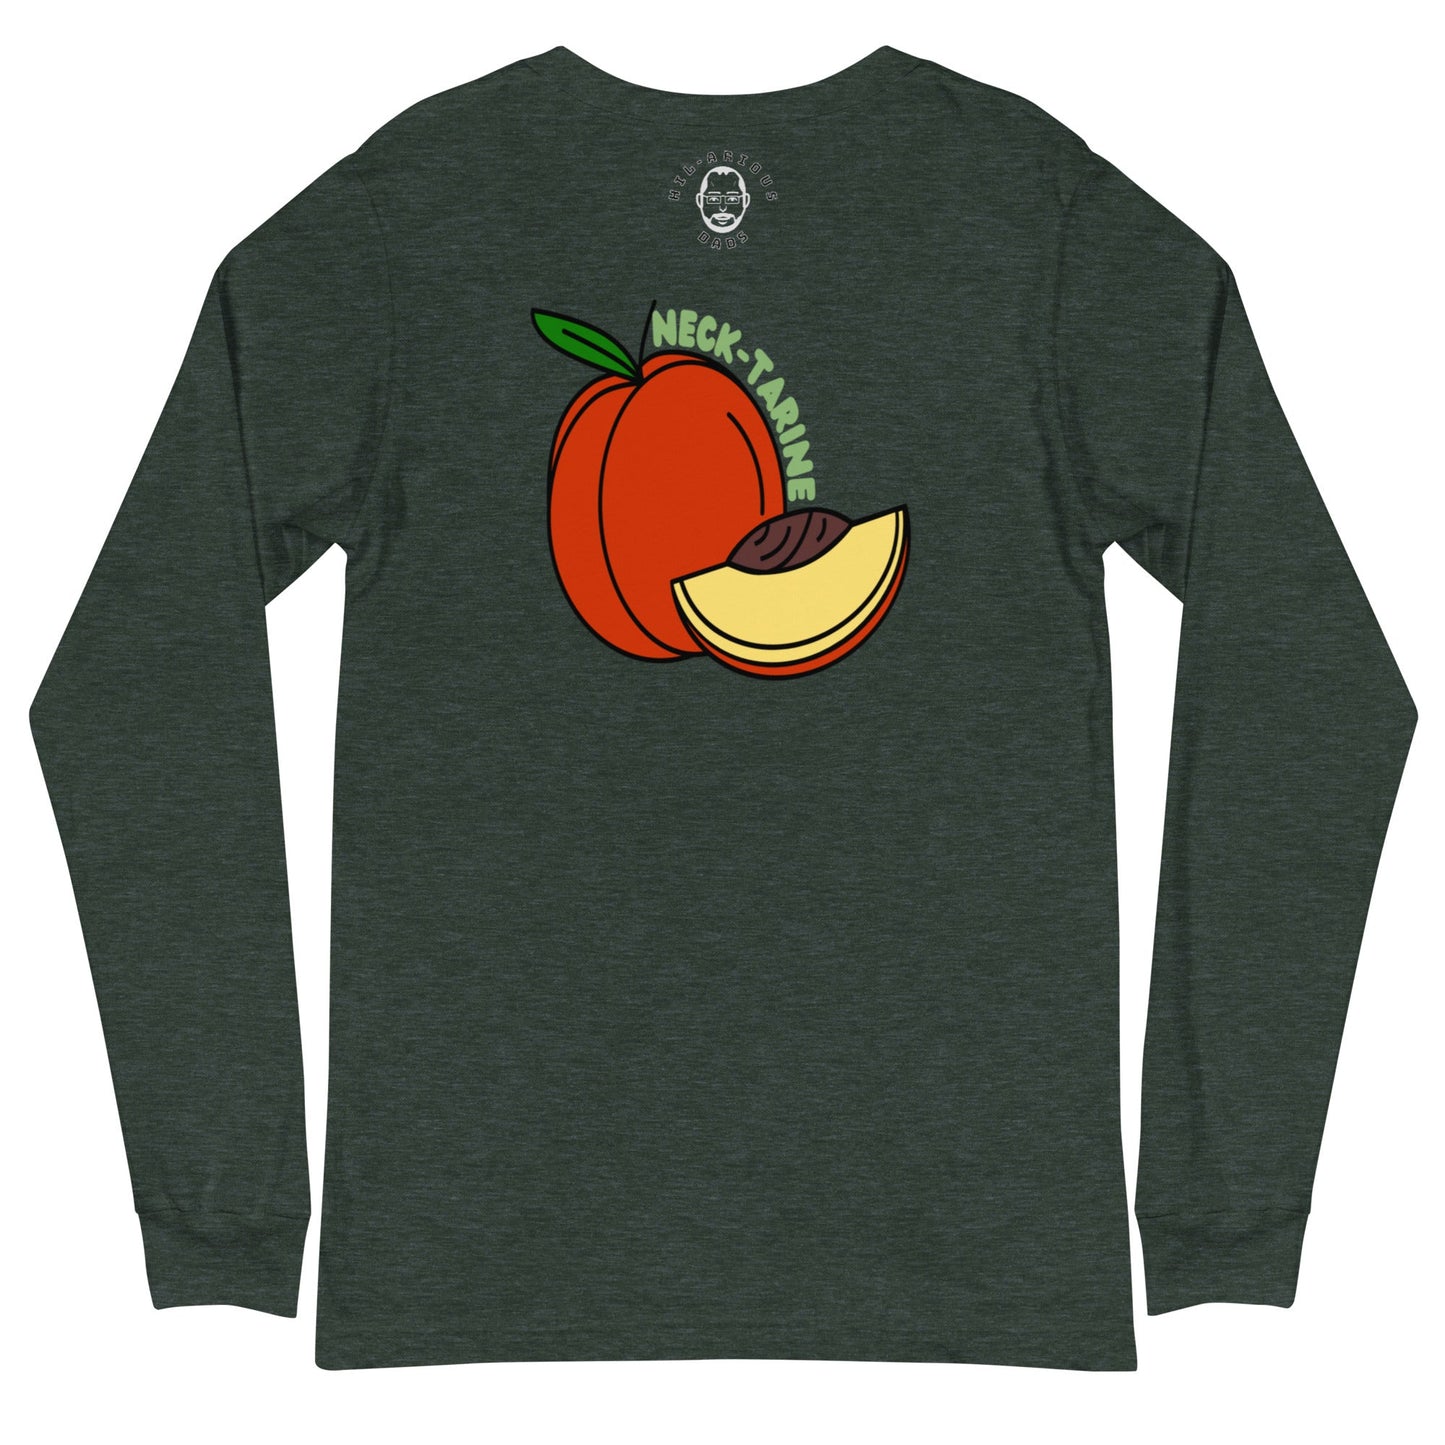 What's a Vampire's favorite fruit?-Long Sleeve Tee - Hil-arious Dads